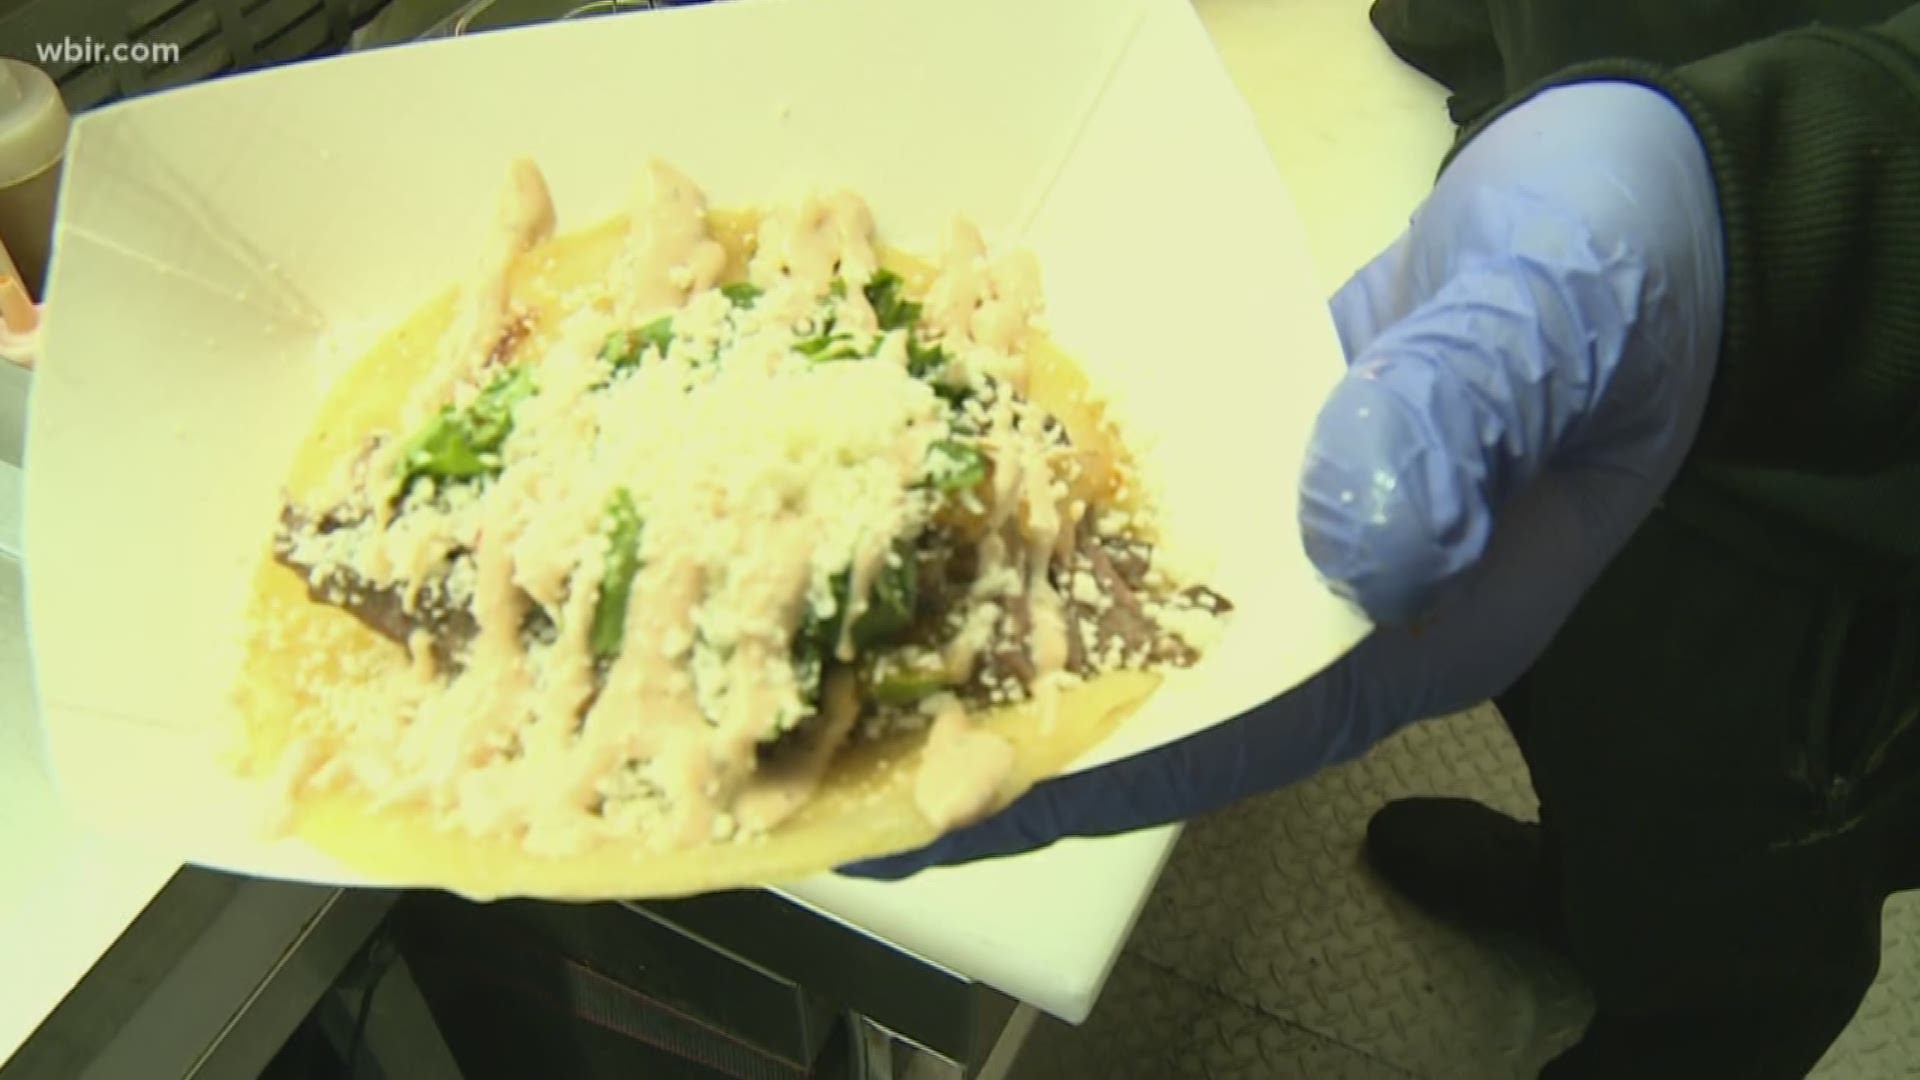 Christopher Jones "CJ" from CJ's Tacos joins us to make the food truck's steak supreme taco.